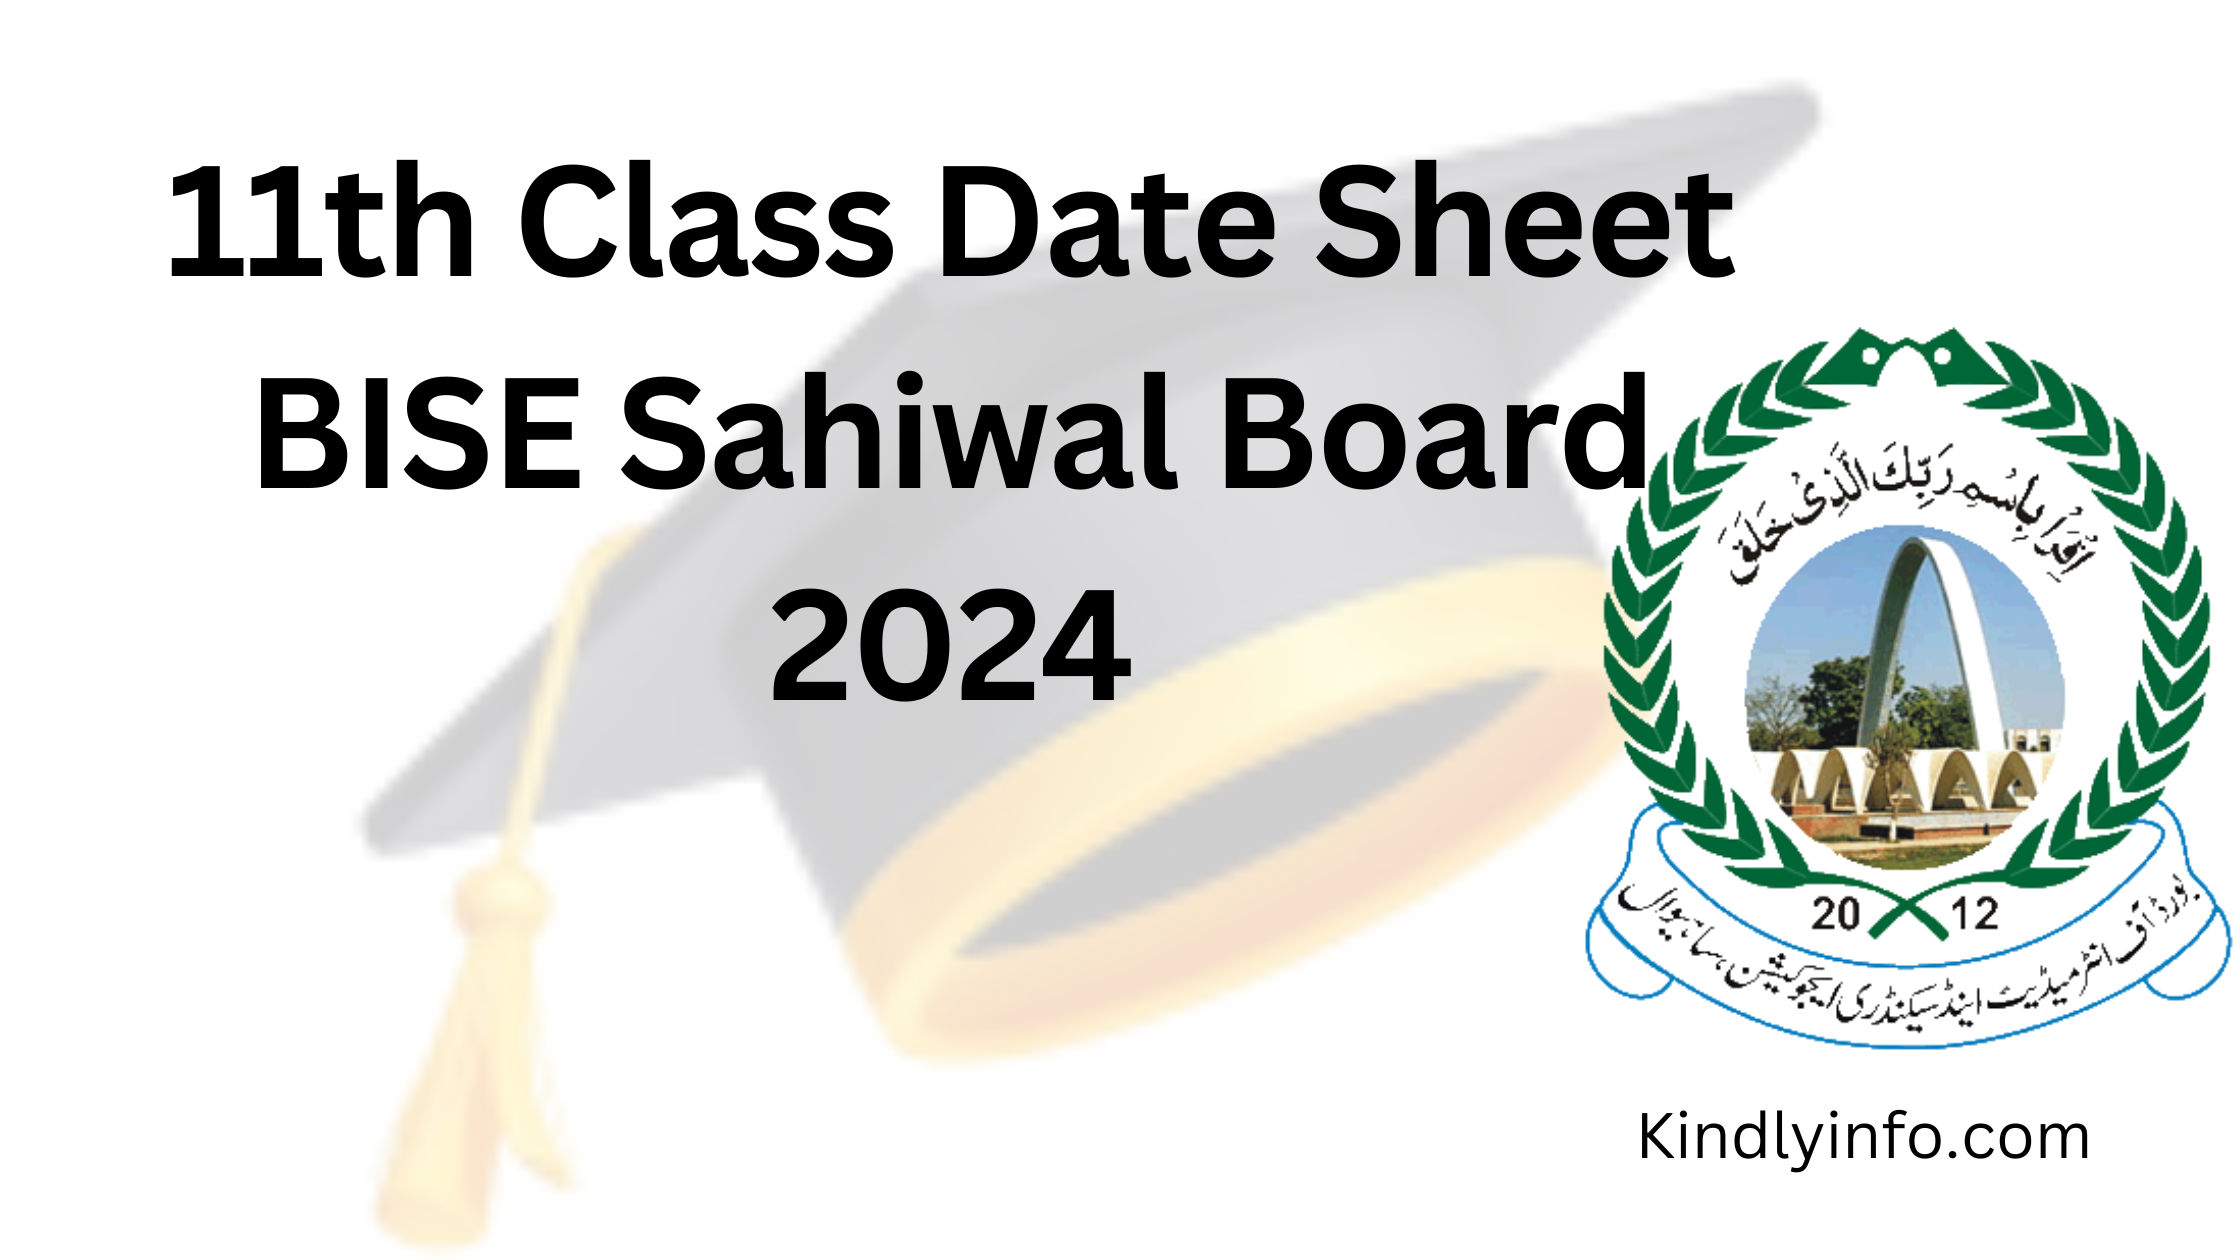 Access valuable resources and tips to excel in your 1st Year 11th Class exams conducted by BISE Sahiwal Board in 2024.11th Class Date Sheet.